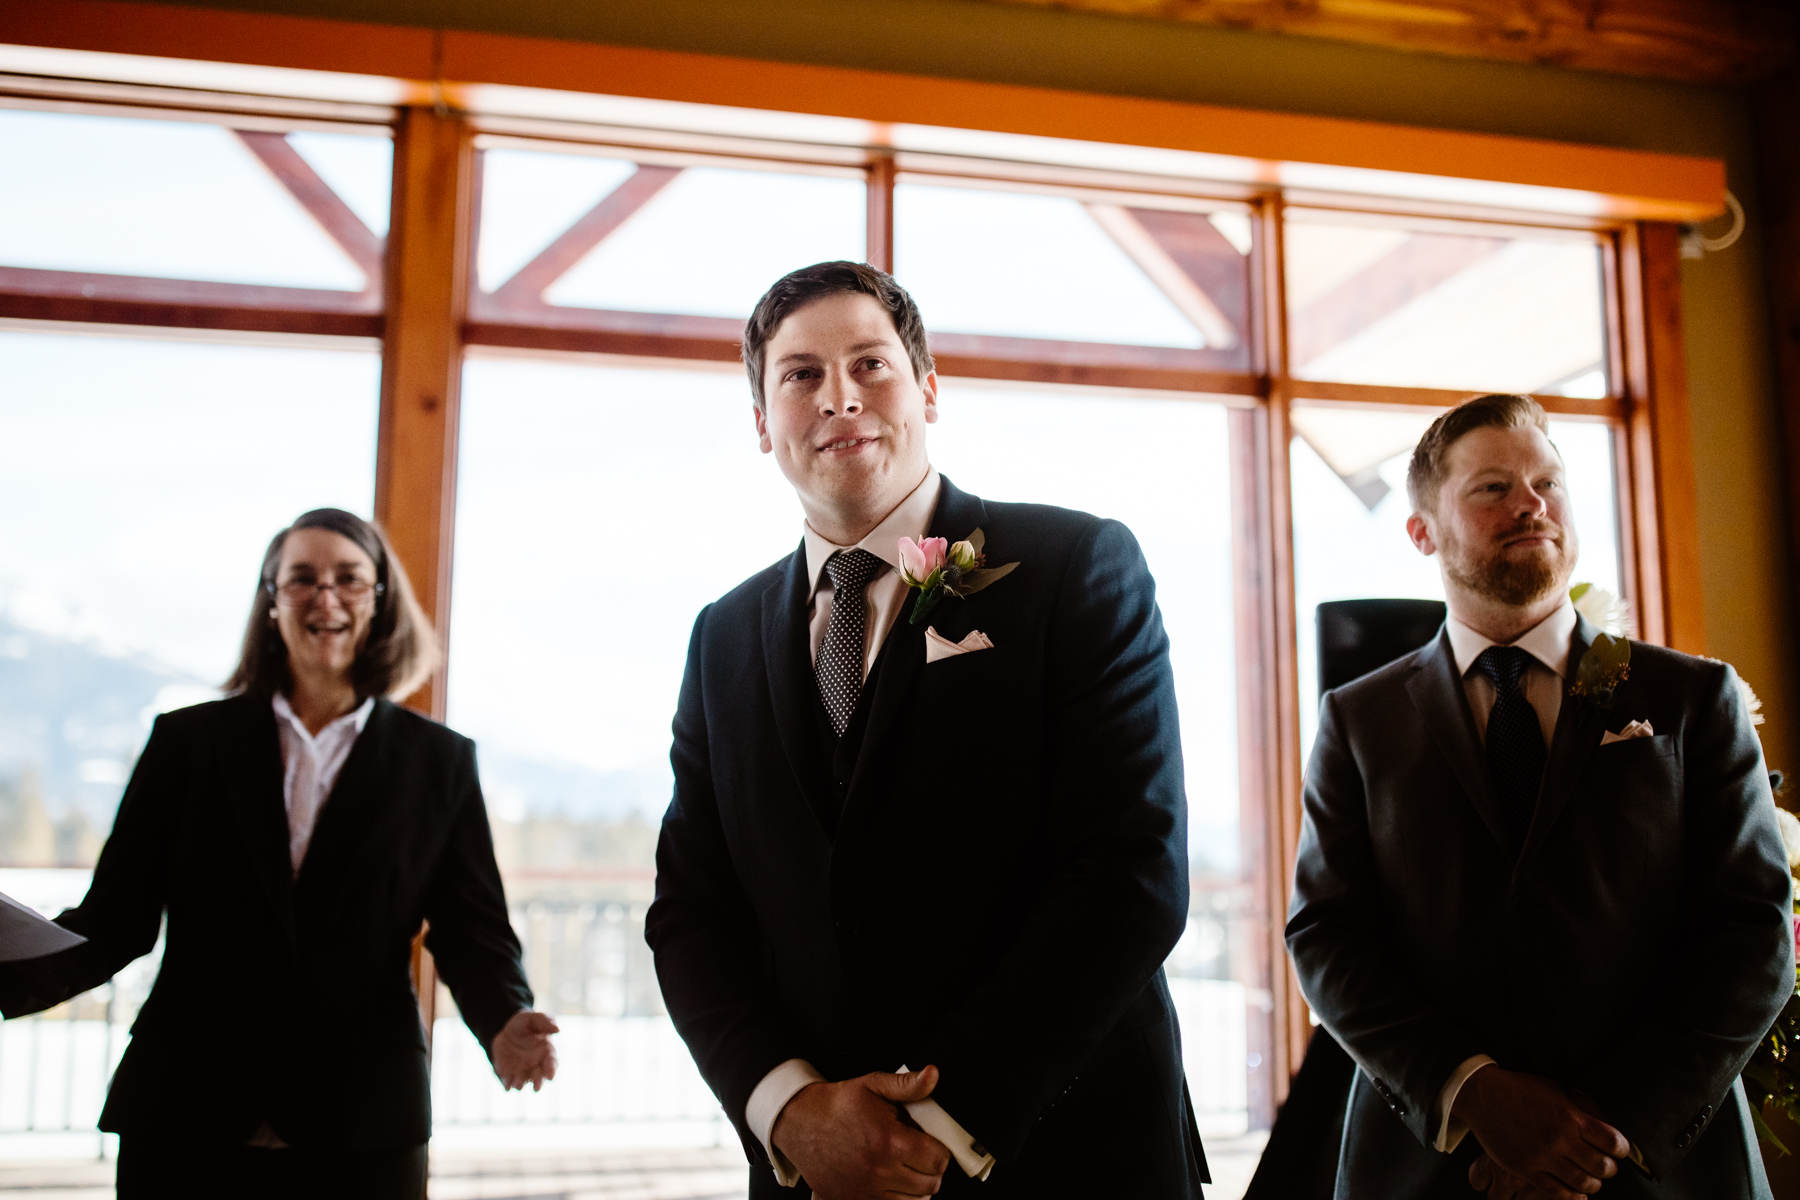 Invermere Wedding Photographers at Eagle Ranch and Panorama Ski Resort - Image 22